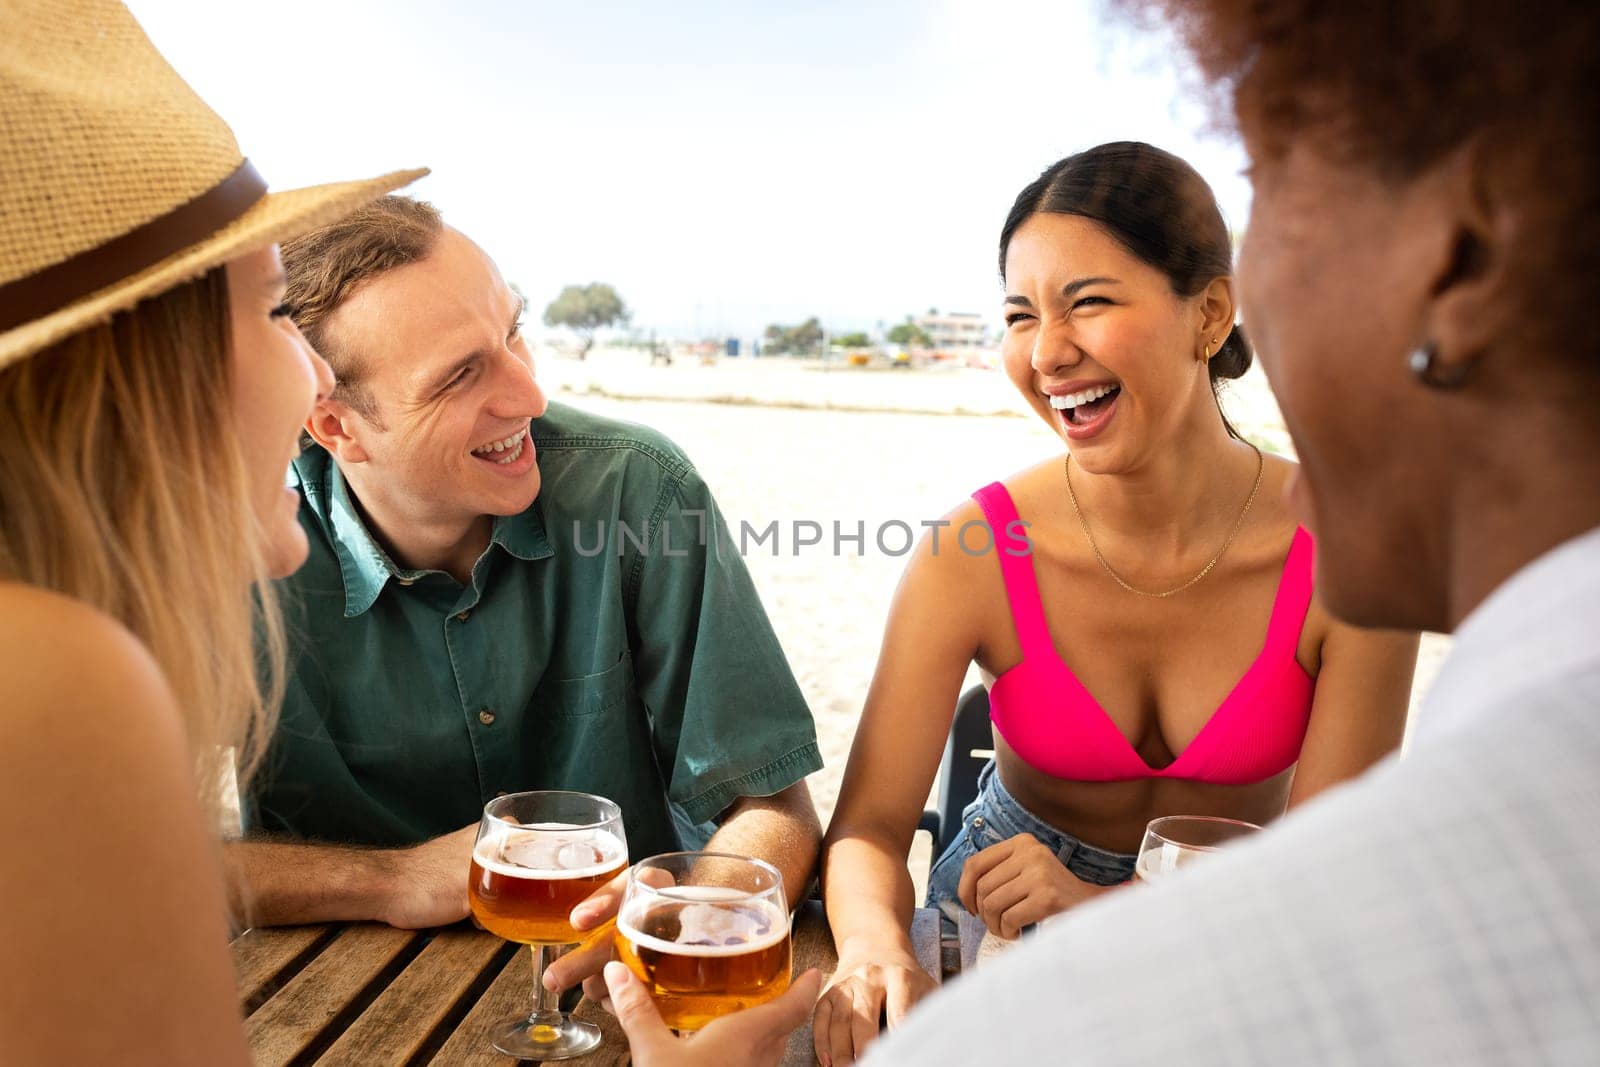 Young hispanic woman laughing and enjoying vacation with friends. Multiracial people having beer together at a beach bar. Lifestyle concept.